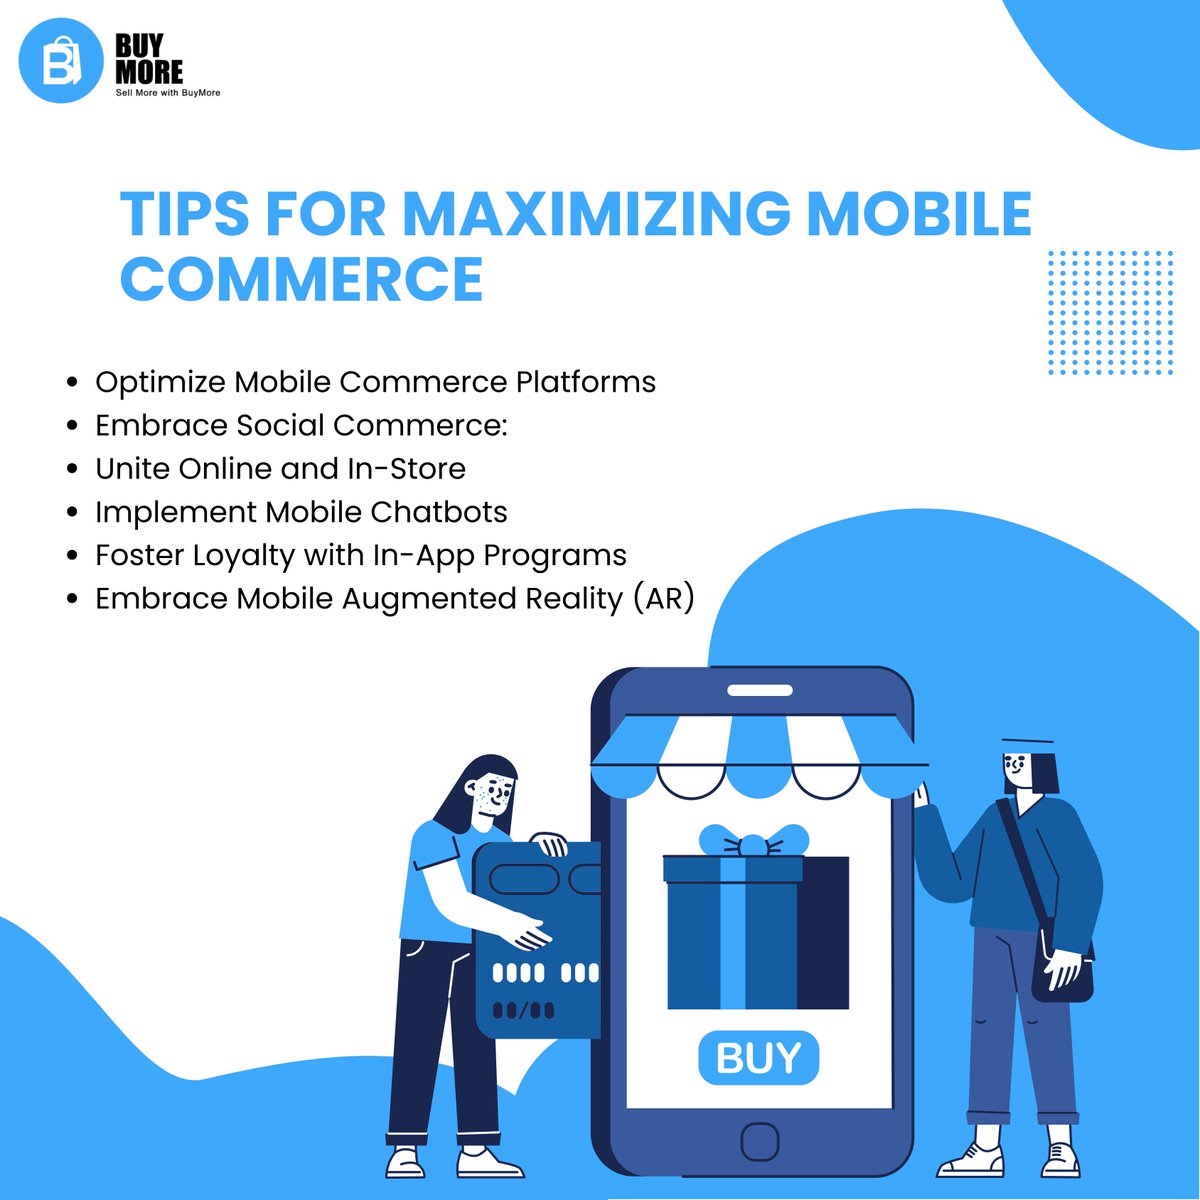 Tips for Maximizing Mobile Commerce! 📱

#MobileCommerceTips #MobileCommerce #SocialCommerceStrategies #OmnichannelShopping #ChatBots #CustomerService #OnlineRetail #MobileShopping #DigitalCommerce #Omnichannel #OnlineShopping #Ecommerce #BuyMore